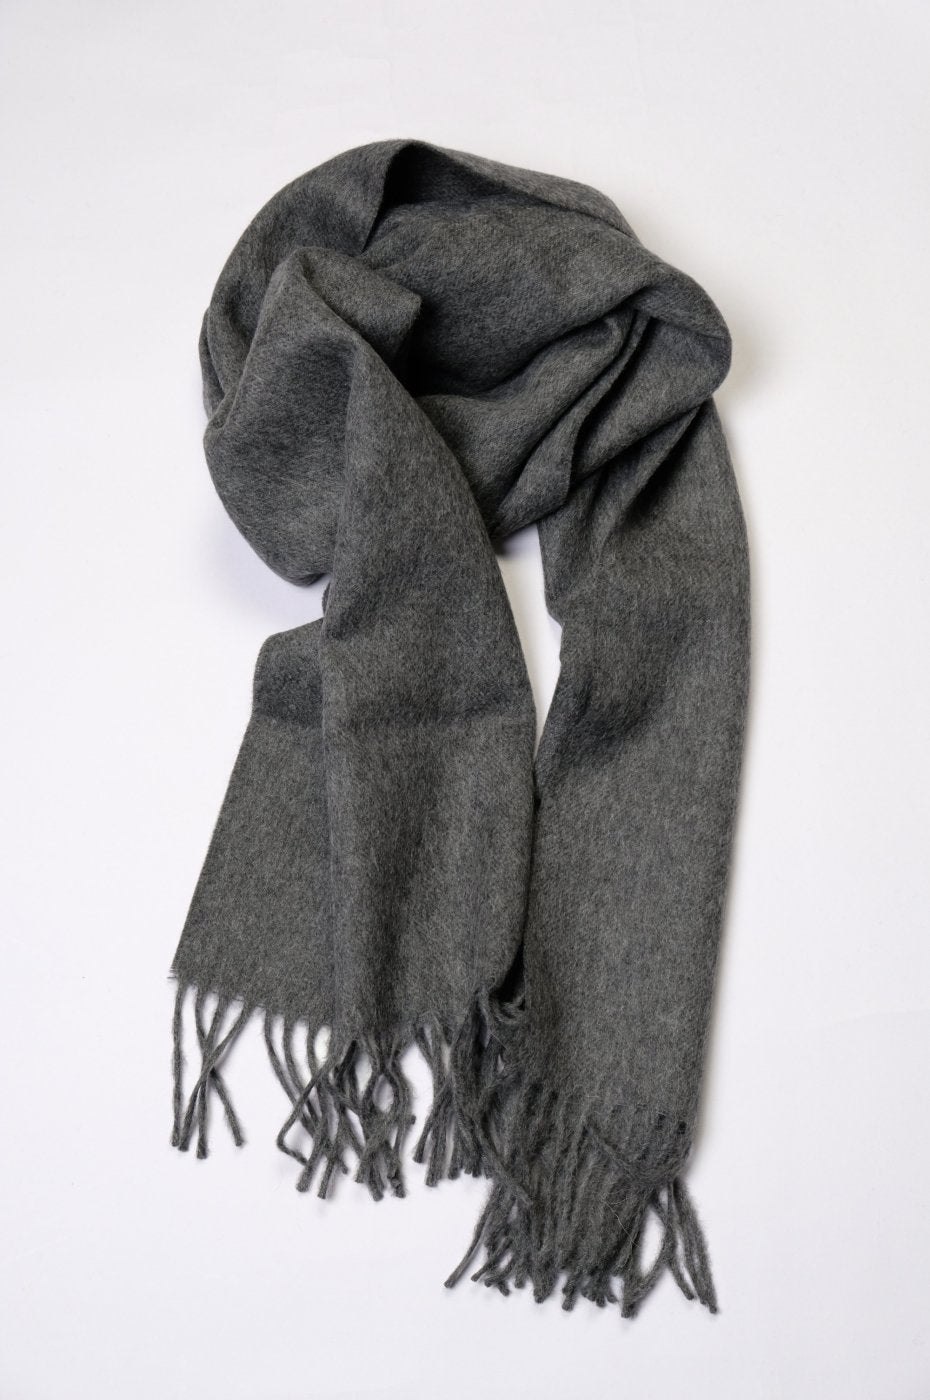 THE INOUE BROTHERS... "BRUSHED SCARF/GREY"